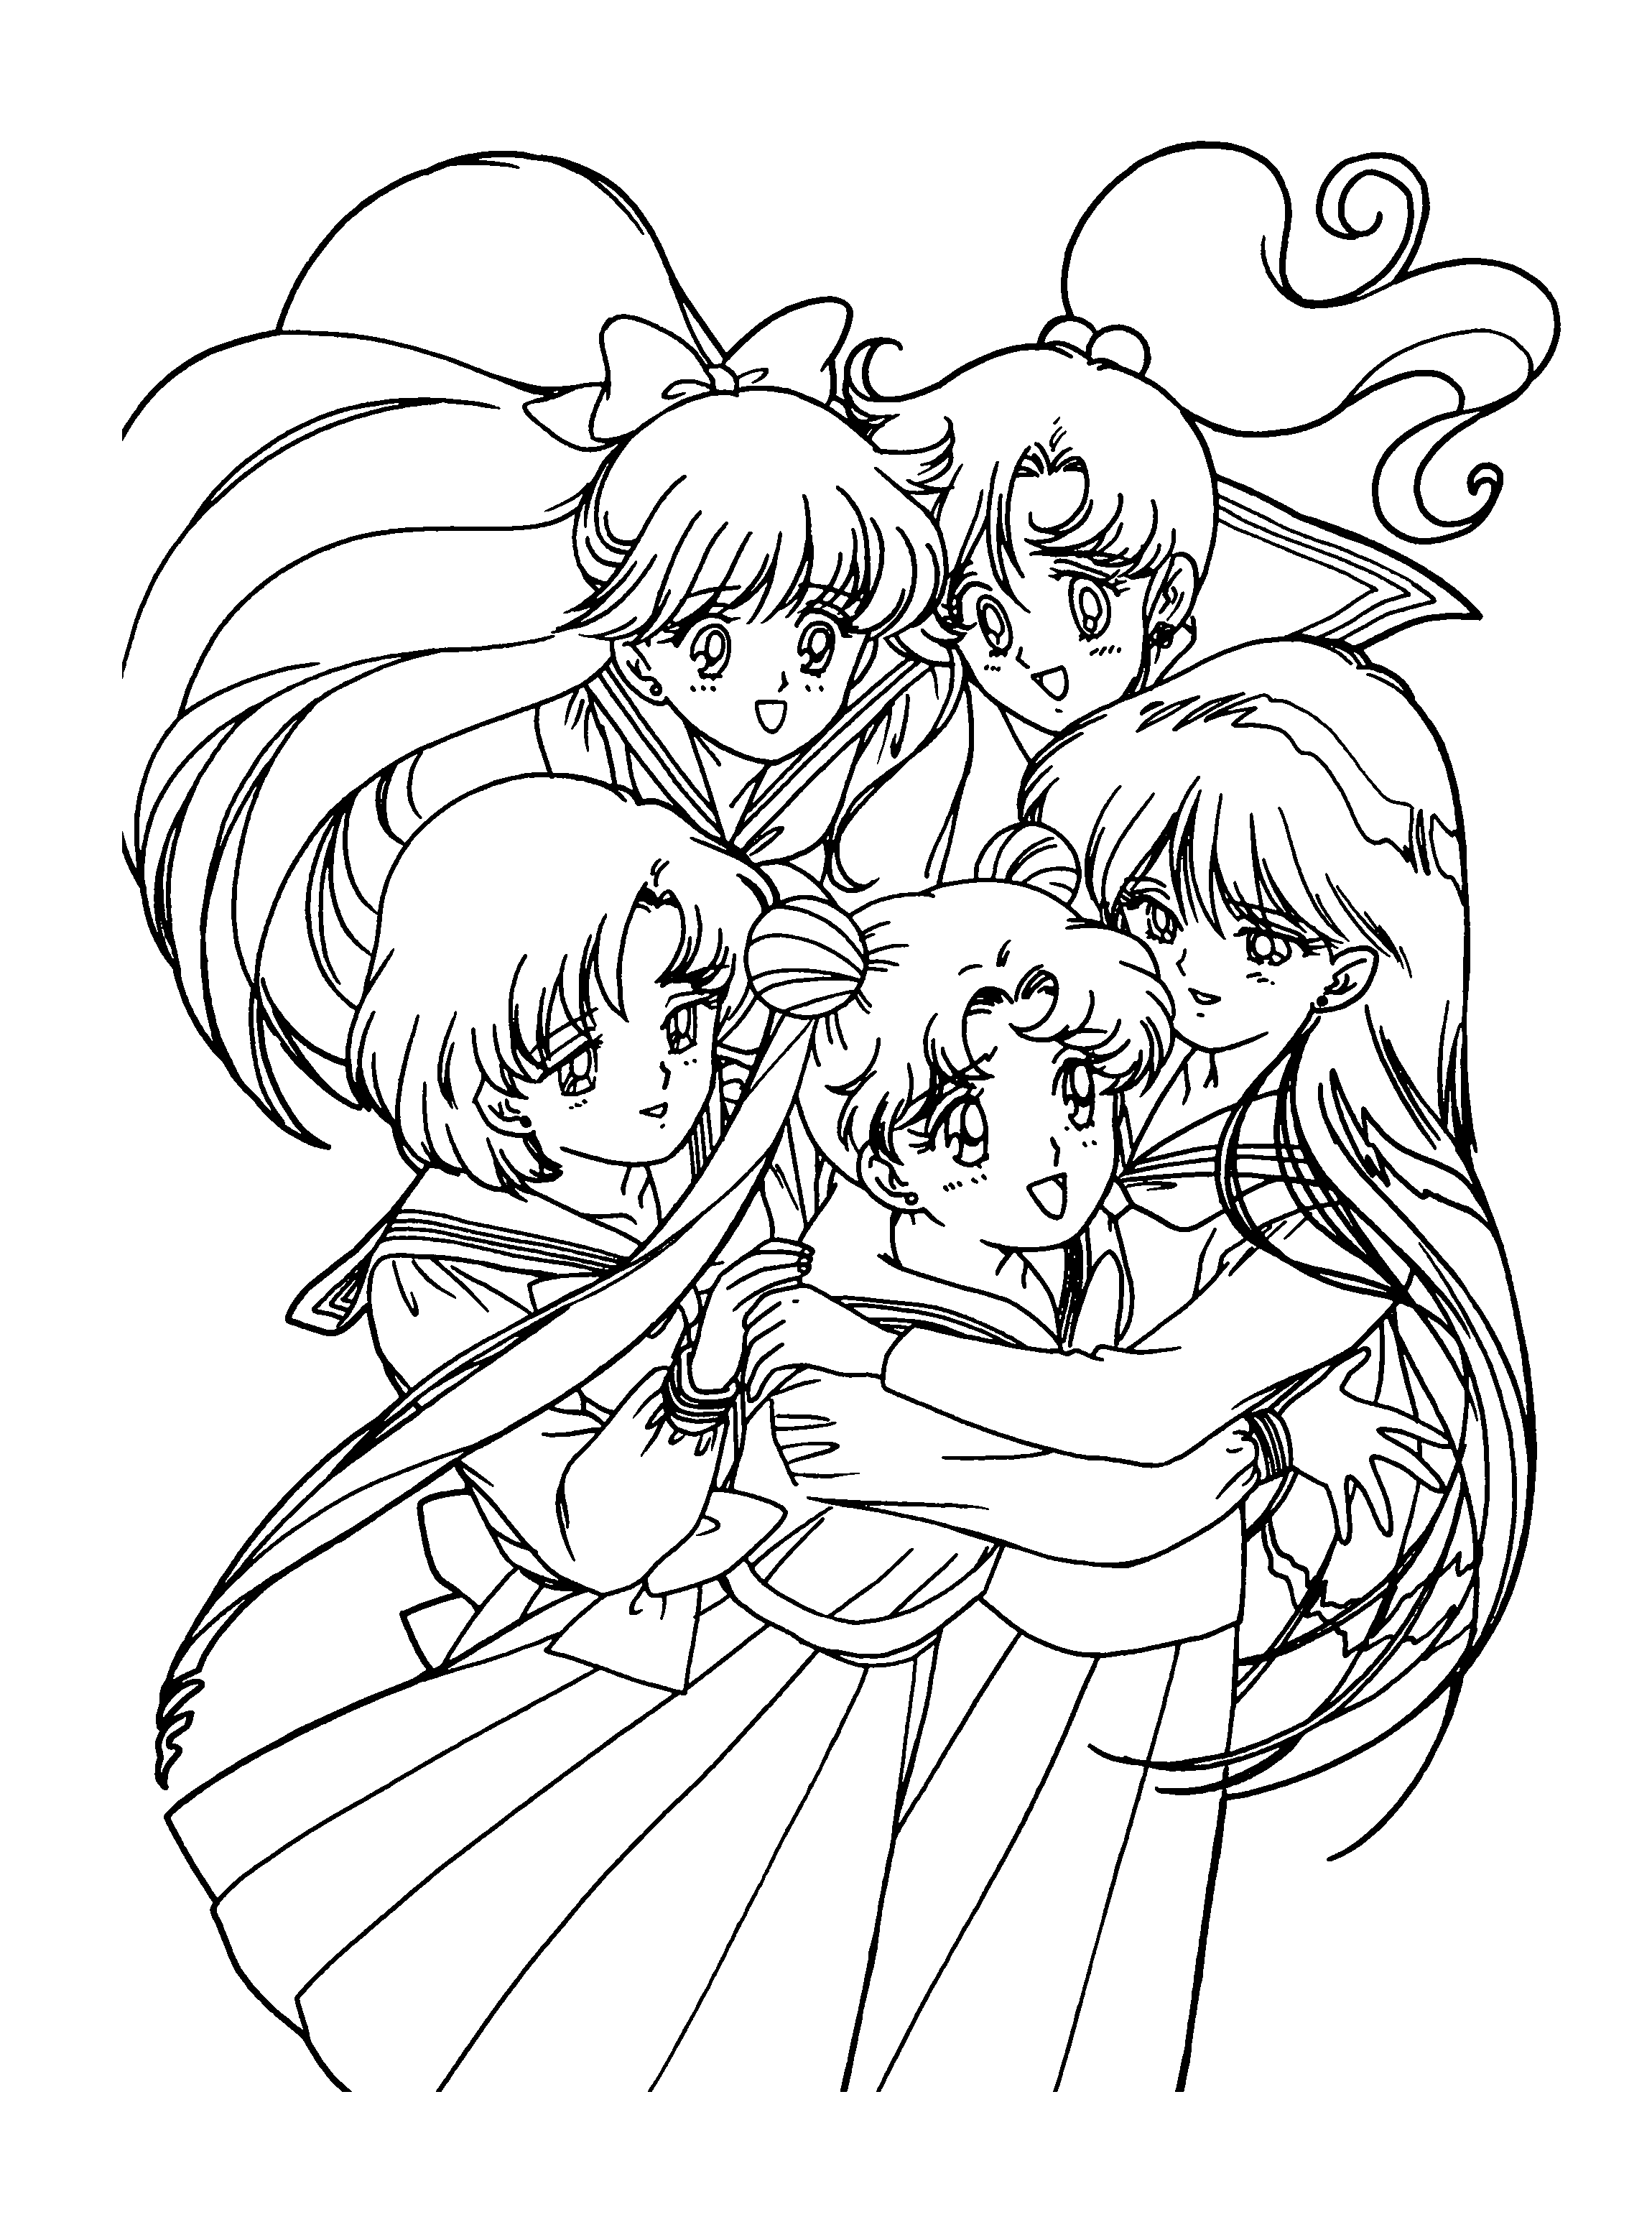 Sailor Moon drawing and coloring page